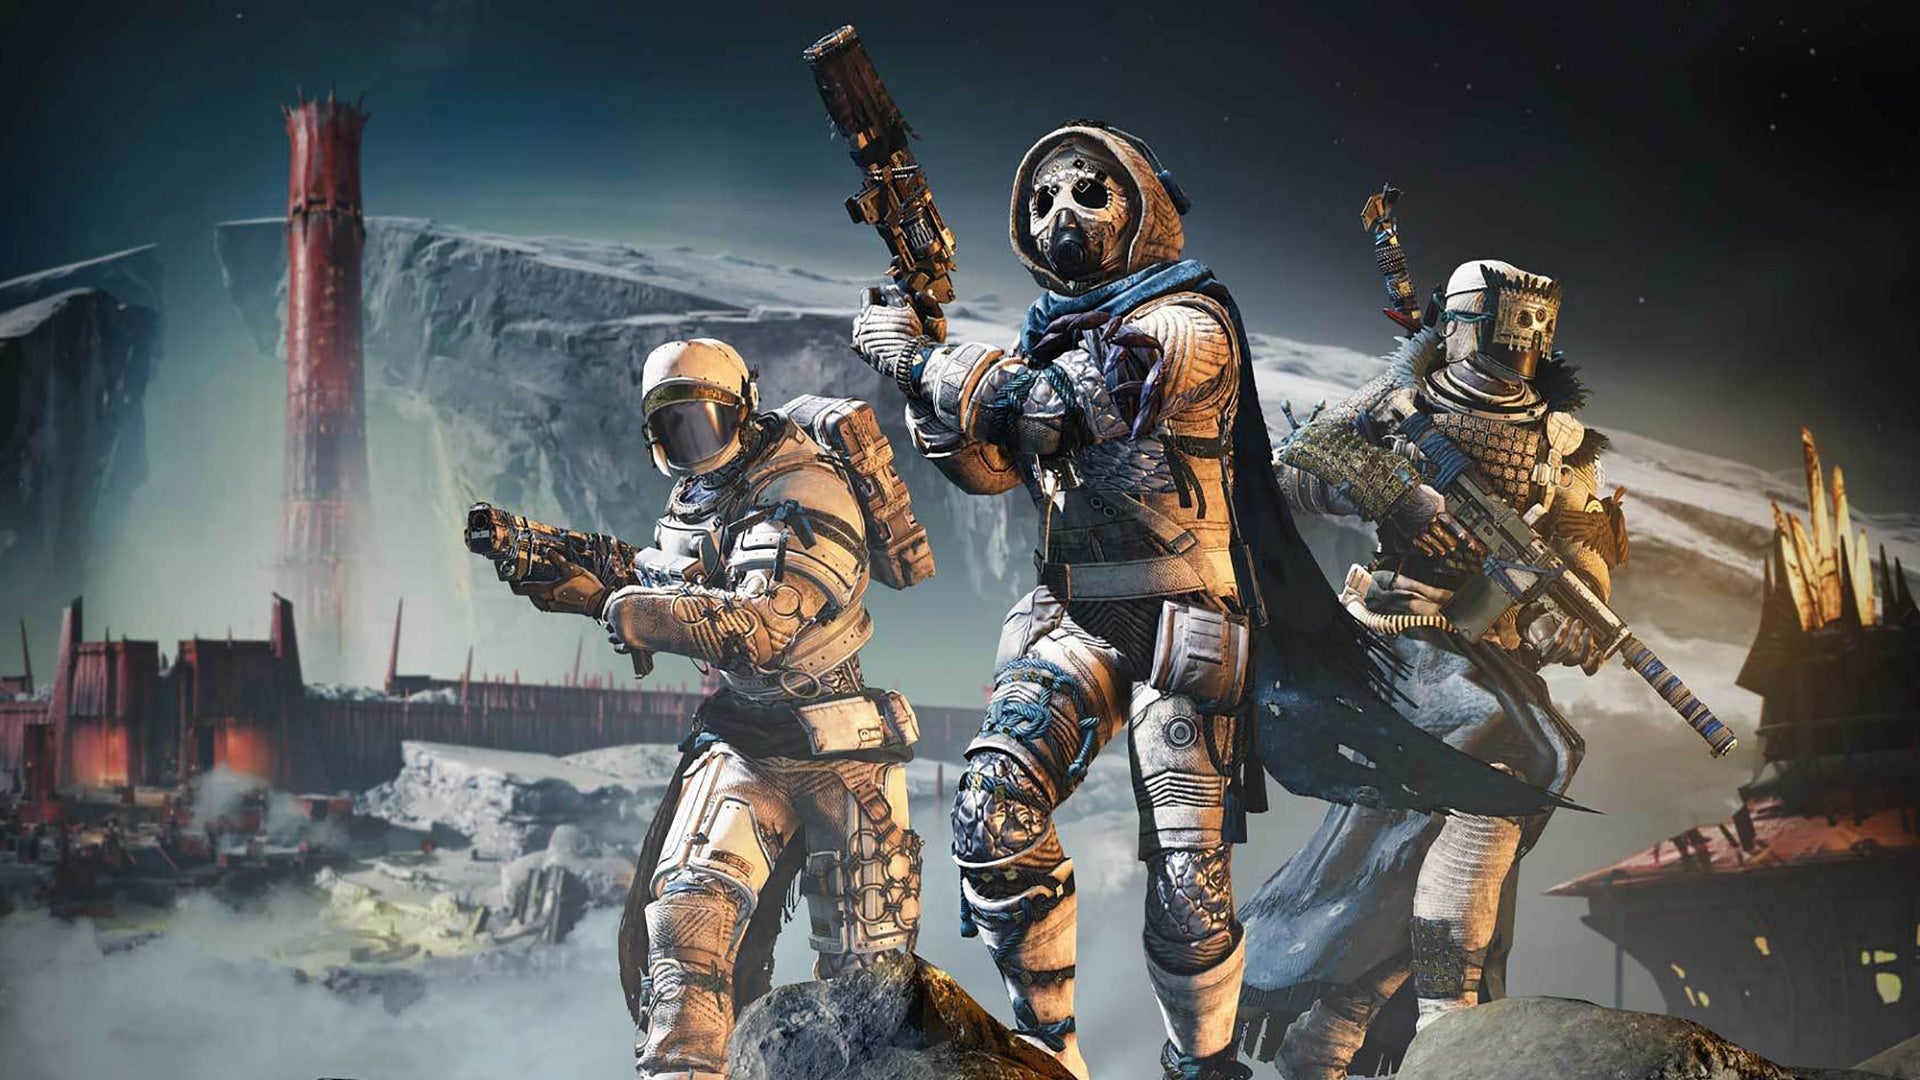 Three guardians on the moon in Destiny 2.